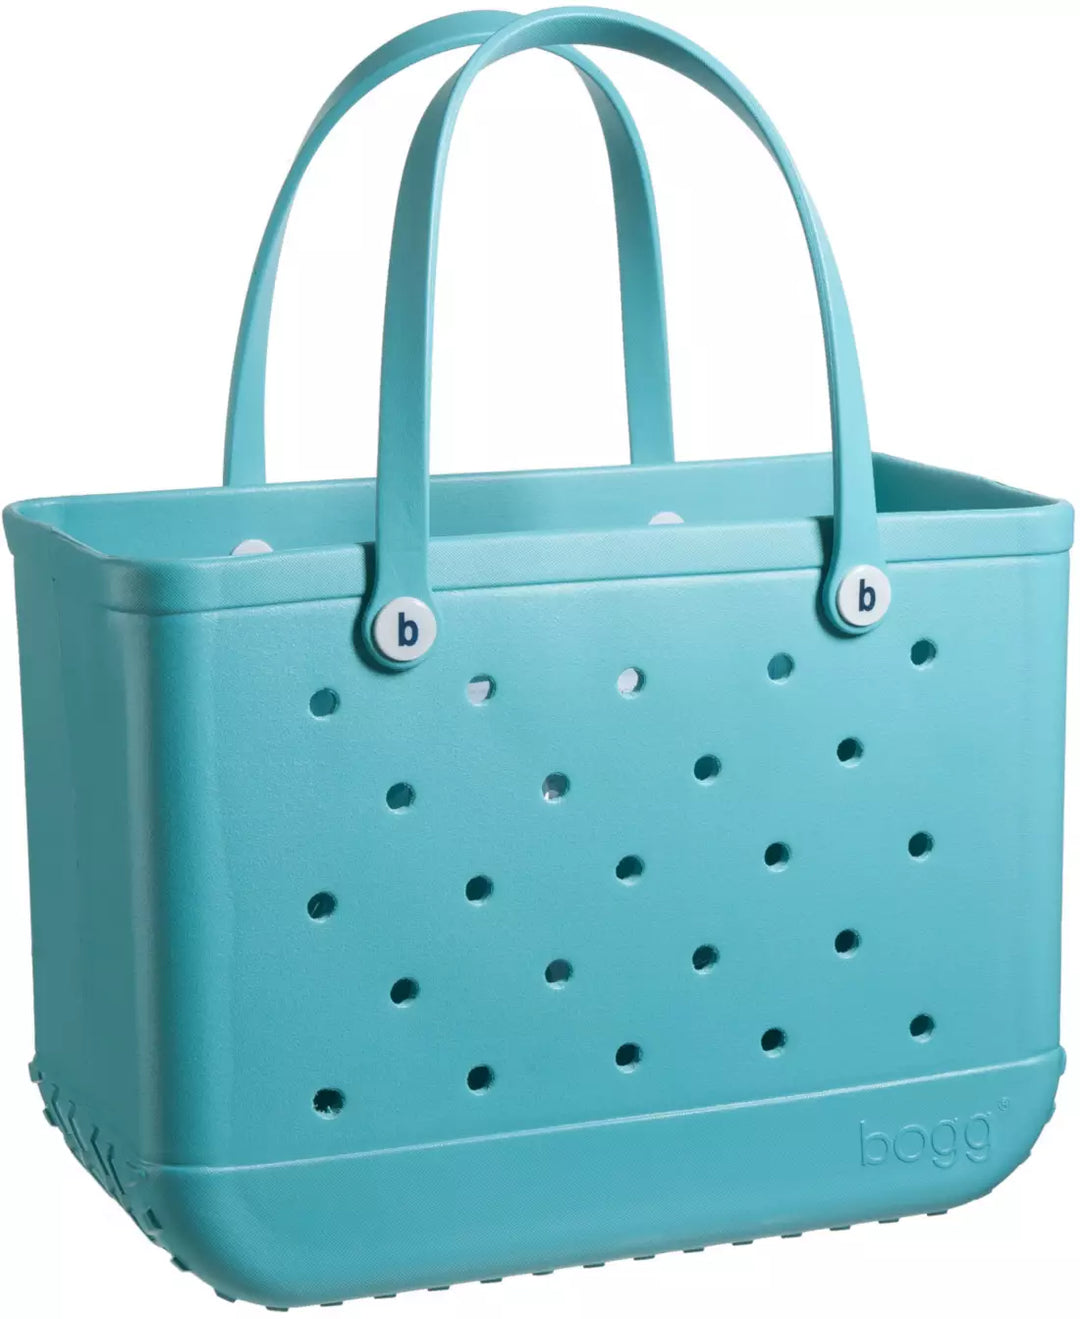 Bogg Bag Original Bogg® Bag in Turquoise (IN-STORE ONLY)